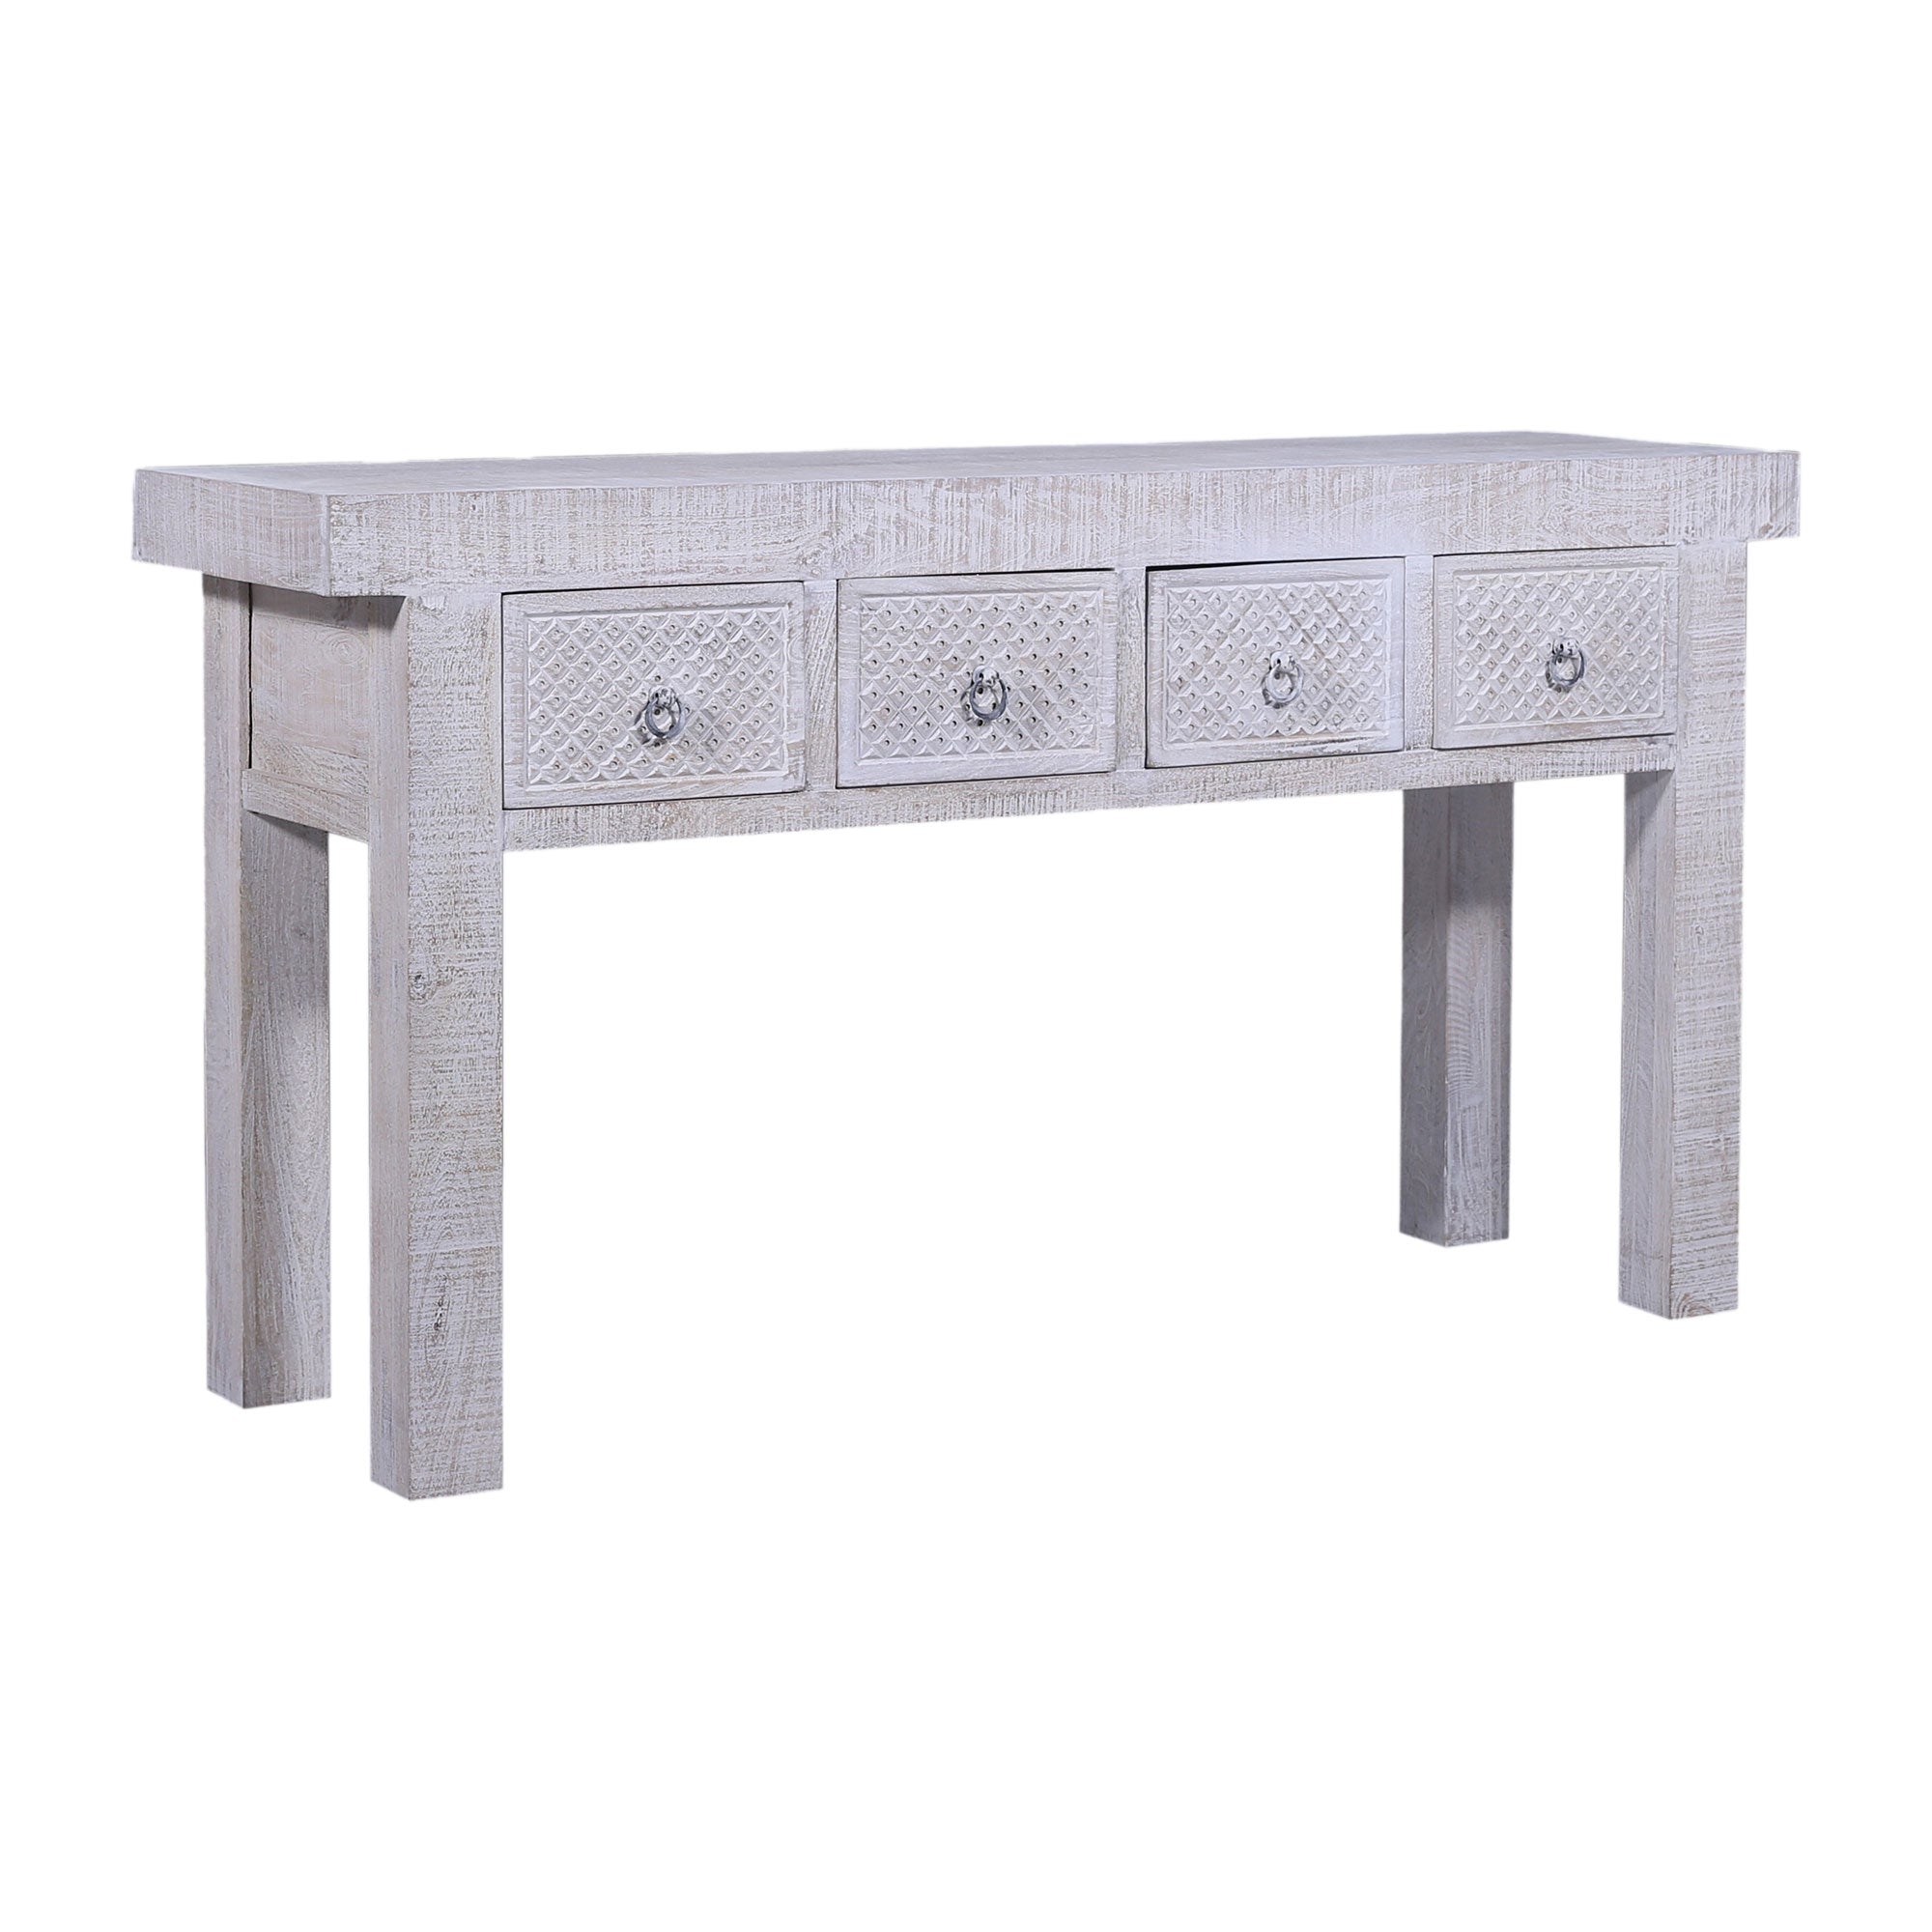 Veena Nomad Wooden Console Table in Distressed White Finish in Dining Furniture by VMInnovations